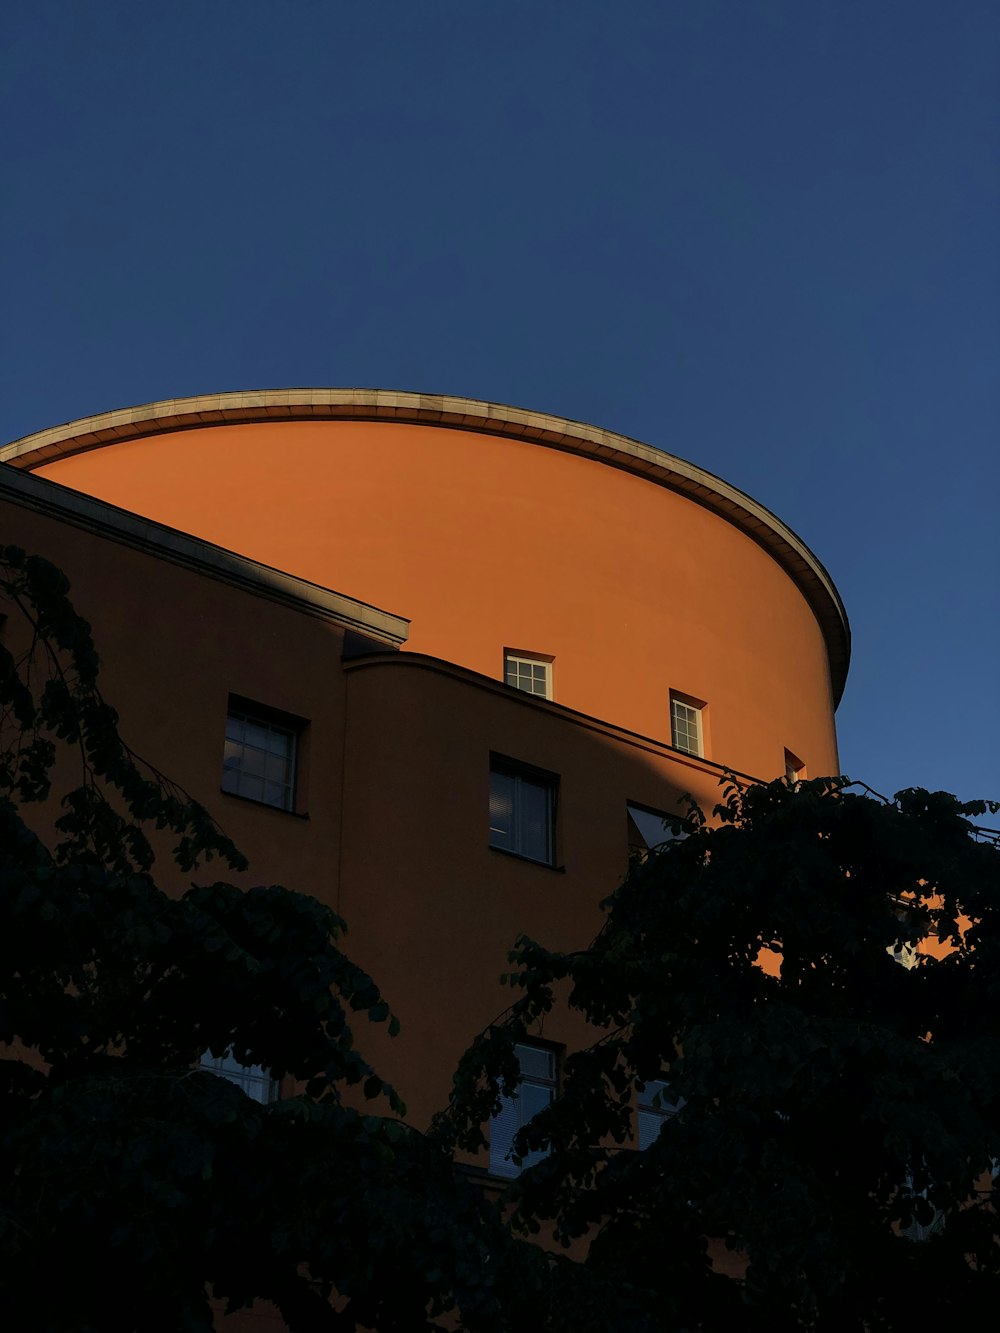 architectural photo of an orange building